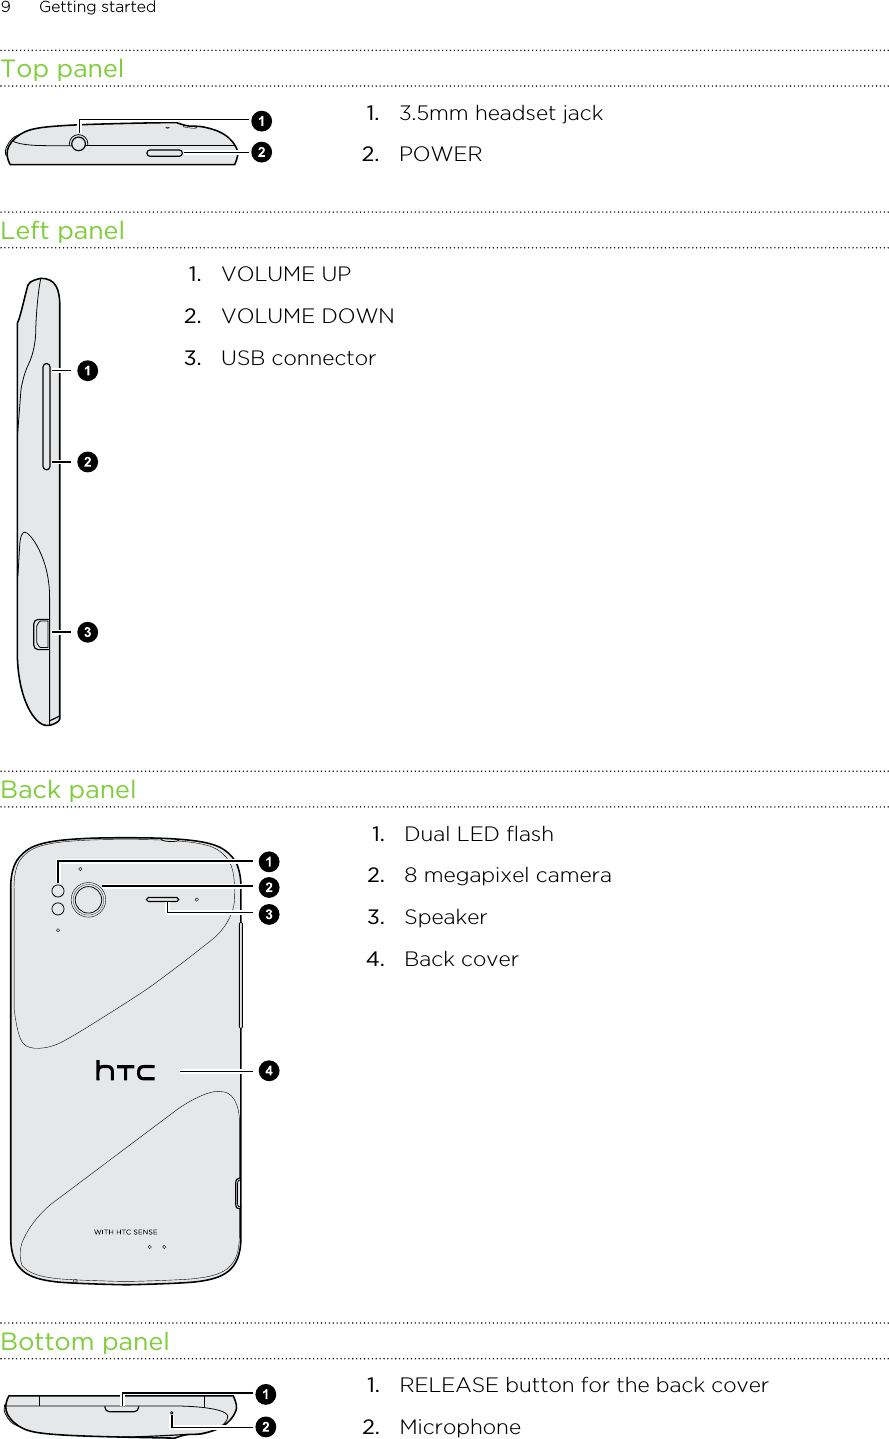 Top panel1. 3.5mm headset jack2. POWERLeft panel1. VOLUME UP2. VOLUME DOWN3. USB connectorBack panel1. Dual LED flash2. 8 megapixel camera3. Speaker4. Back coverBottom panel1. RELEASE button for the back cover2. Microphone9 Getting started